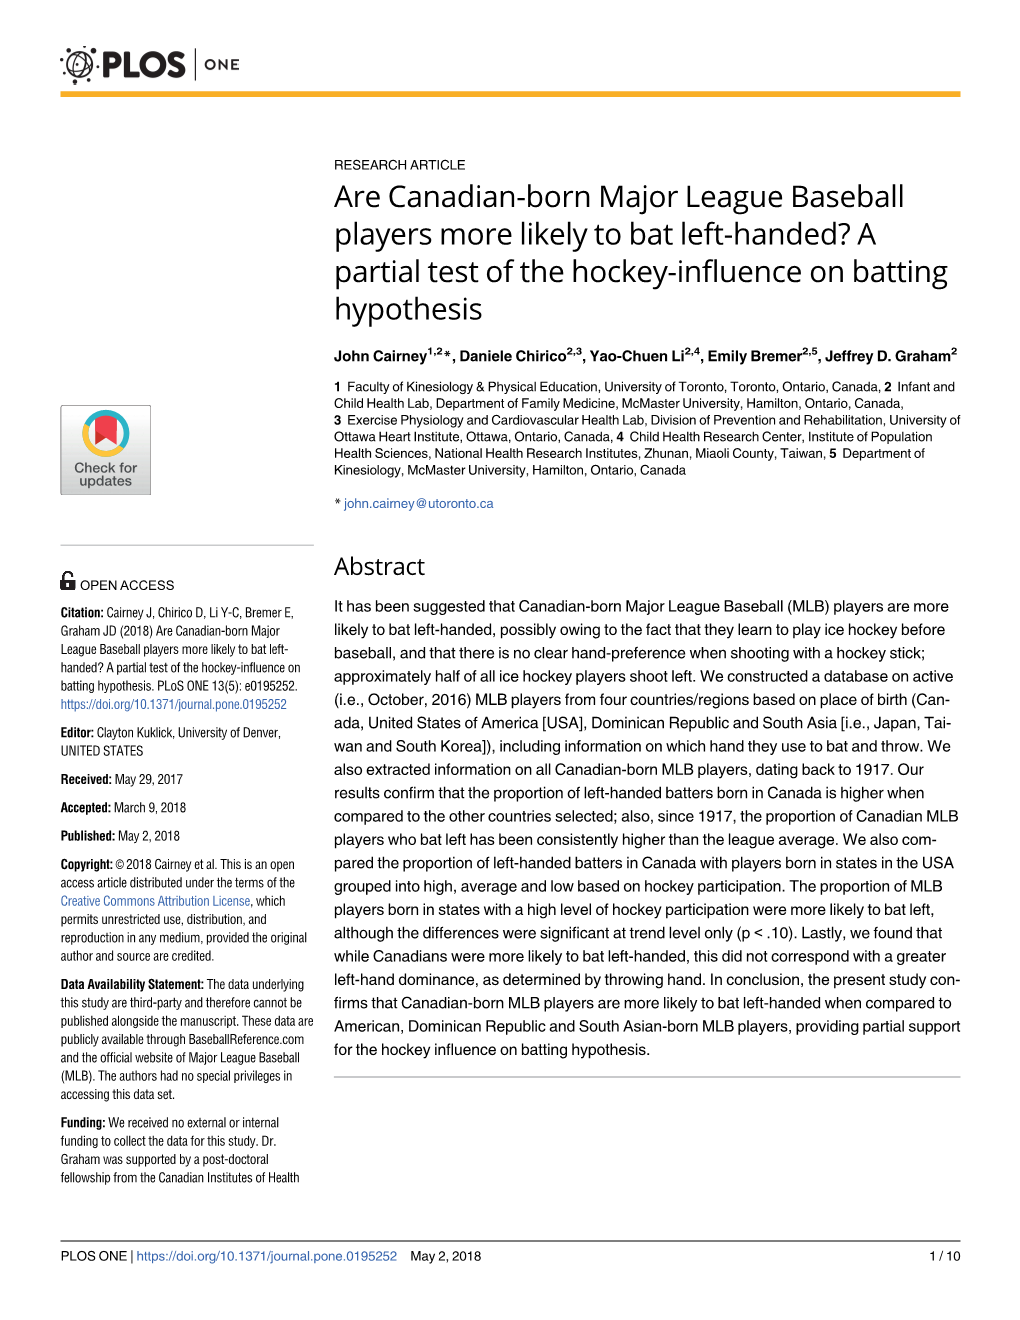 Are Canadian-Born Major League Baseball Players More Likely to Bat Left-Handed? a Partial Test of the Hockey-Influence on Batting Hypothesis